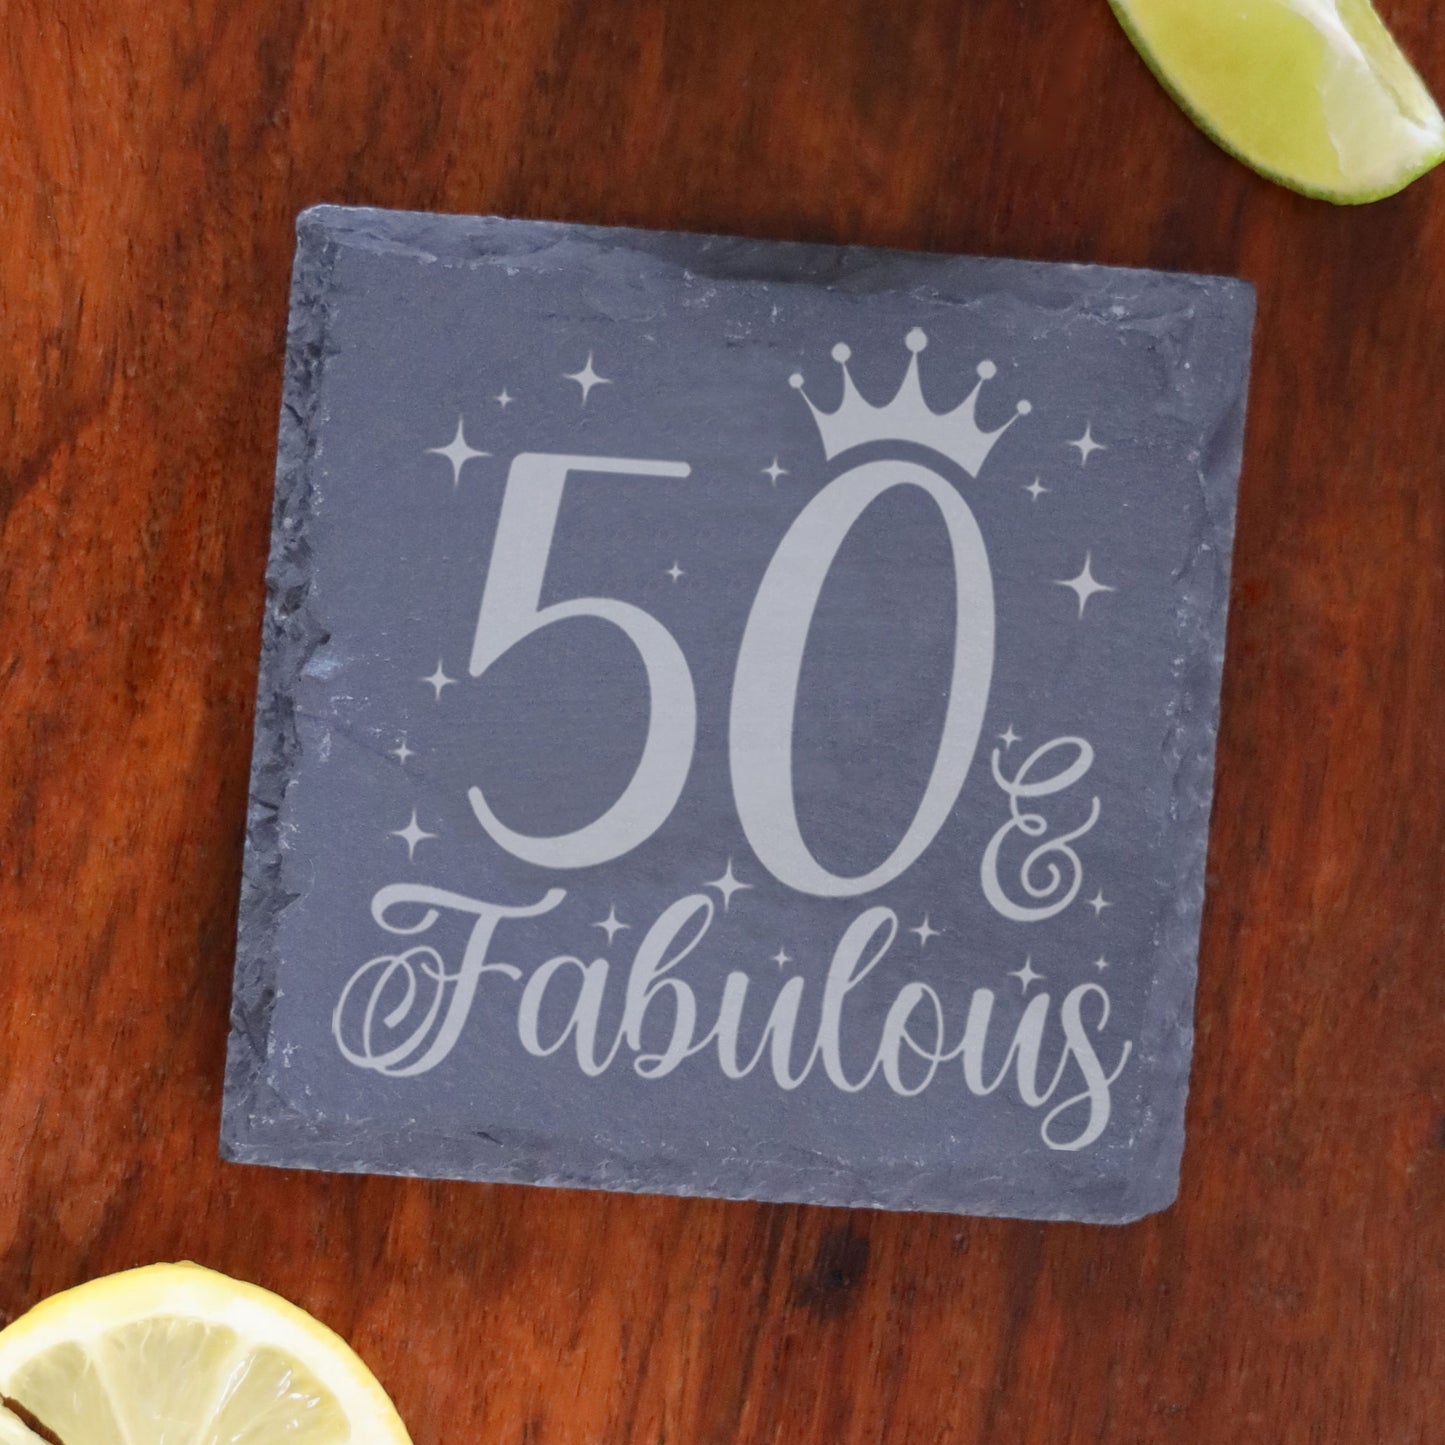 50 & Fabulous 50th Birthday Gift Engraved Wine Glass and/or Coaster Set  - Always Looking Good - Square Coaster Only  